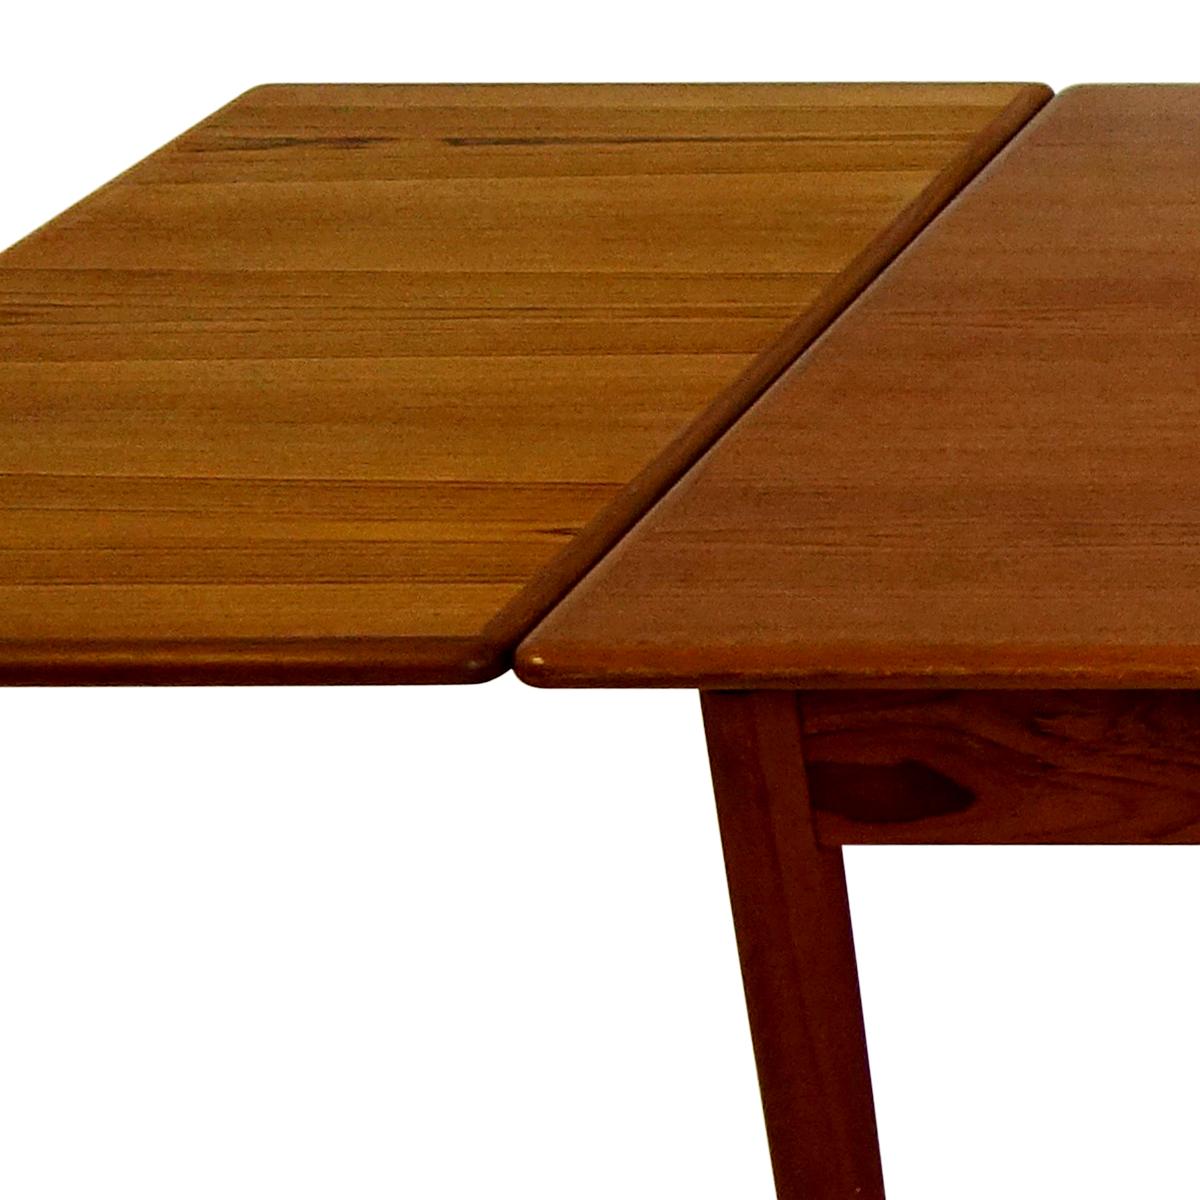 This gorgeous dining table has all the style elements of Classic Mid-Century Modern Scandinavian design. It is made of teak and oakwood and looks very sleek, elegant and very well proportioned.
Apart from being a feast for the eye this table is also